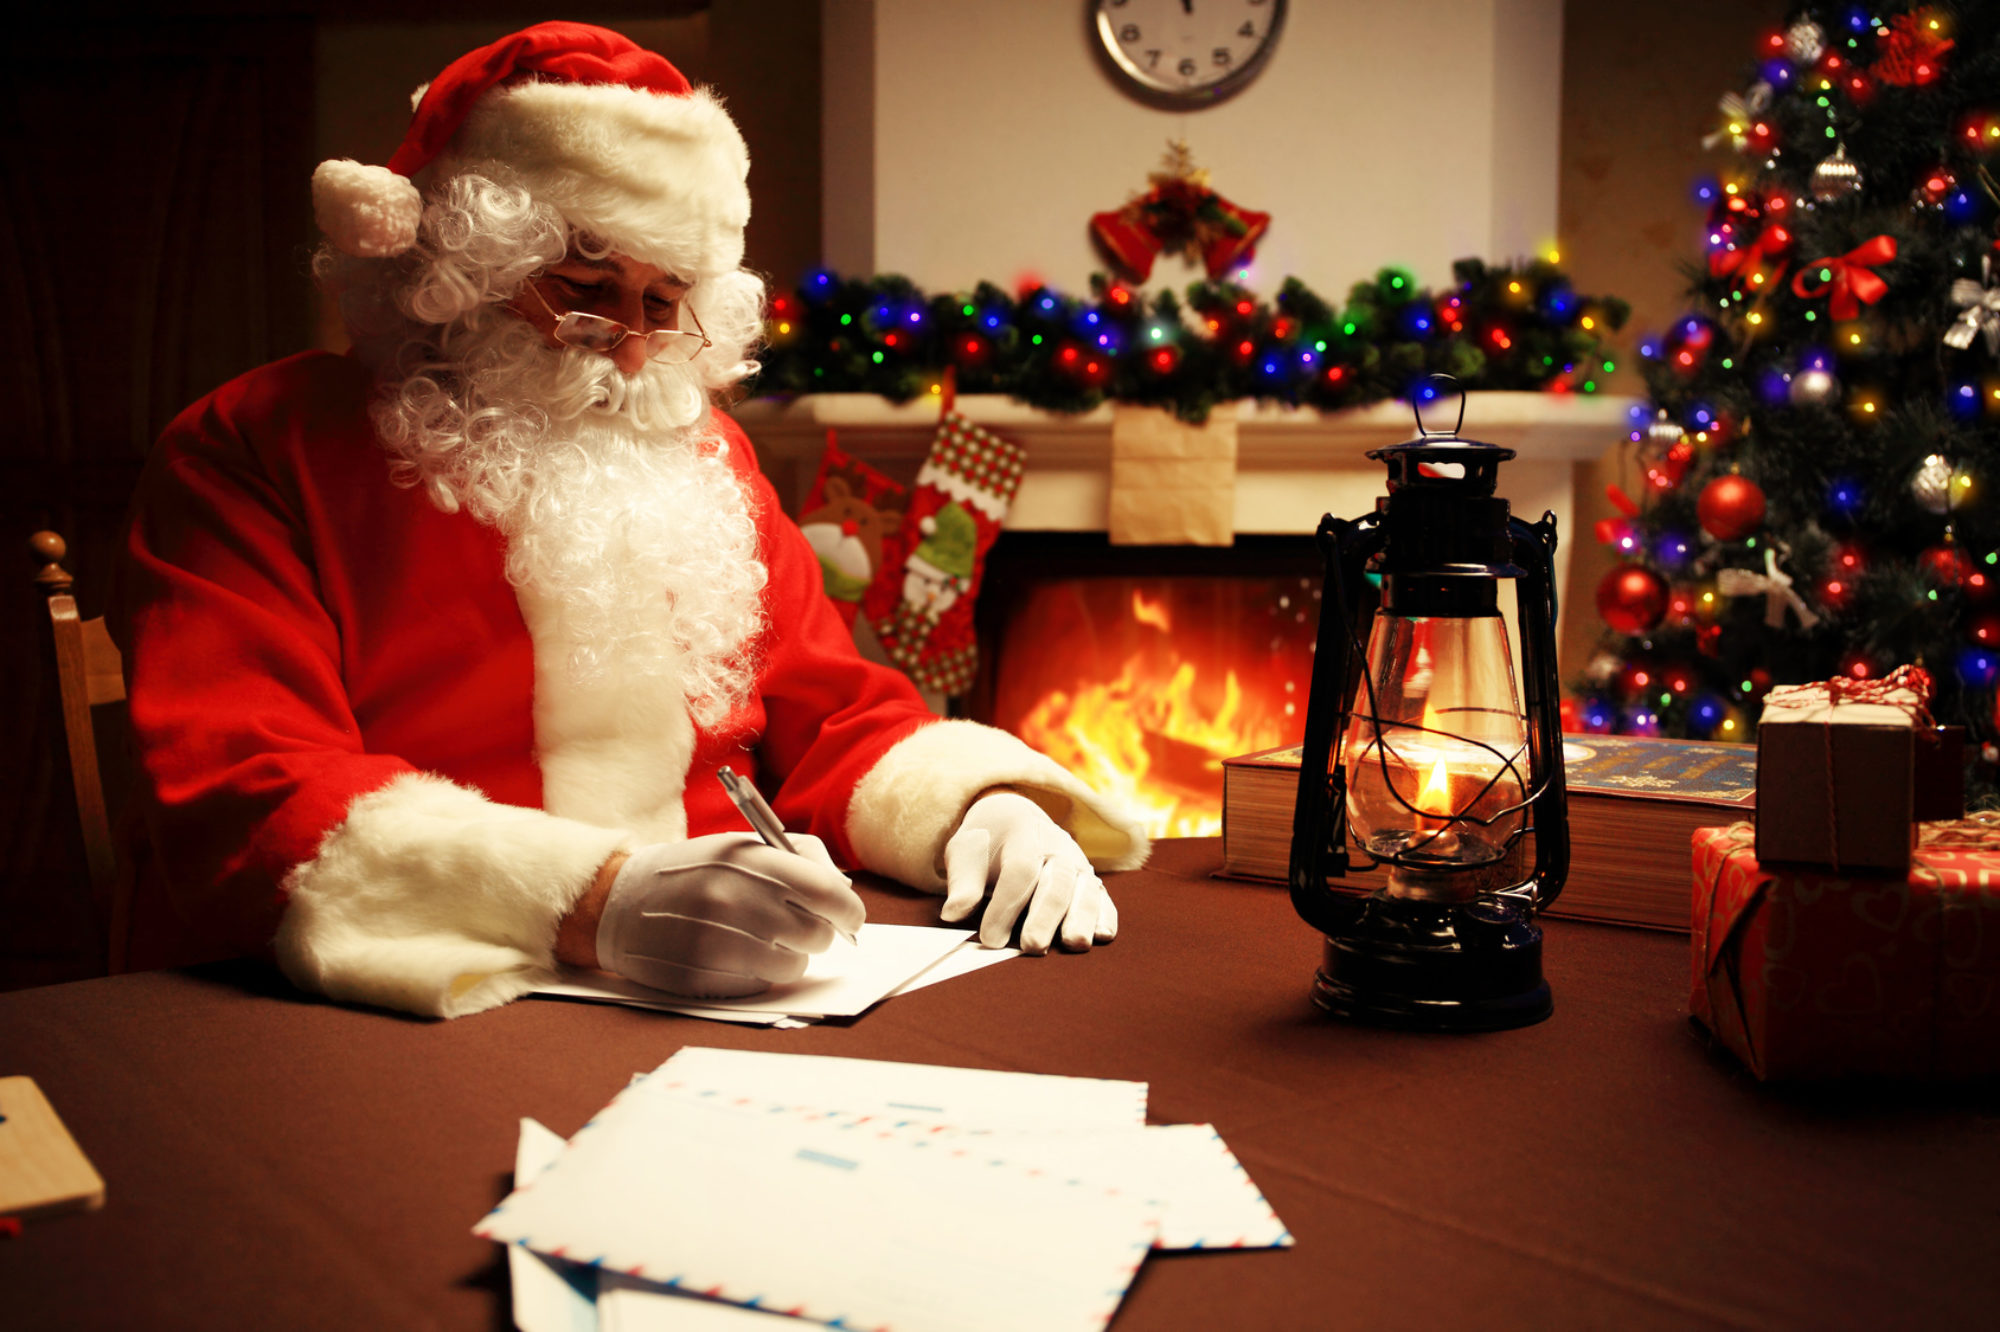 Personalized Letters from Santa